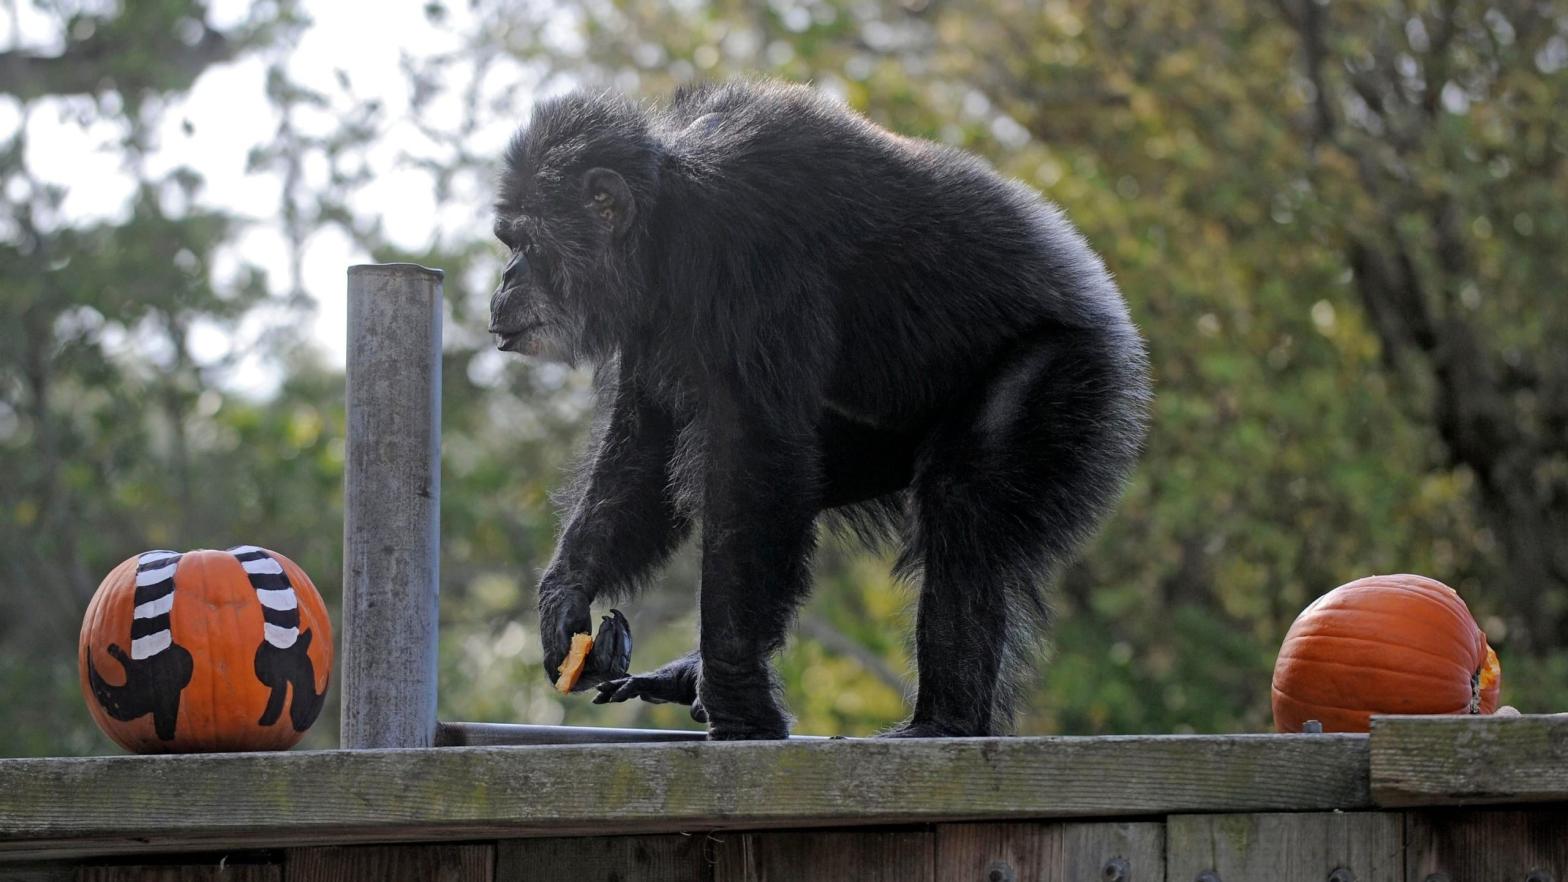 Cobby playing with pumpkins during the San Francisco Zoo's 'Boo at the Zoo' Halloween celebration, in a photo taken in October 2019. (Photo: Russel A. Daniels, AP)